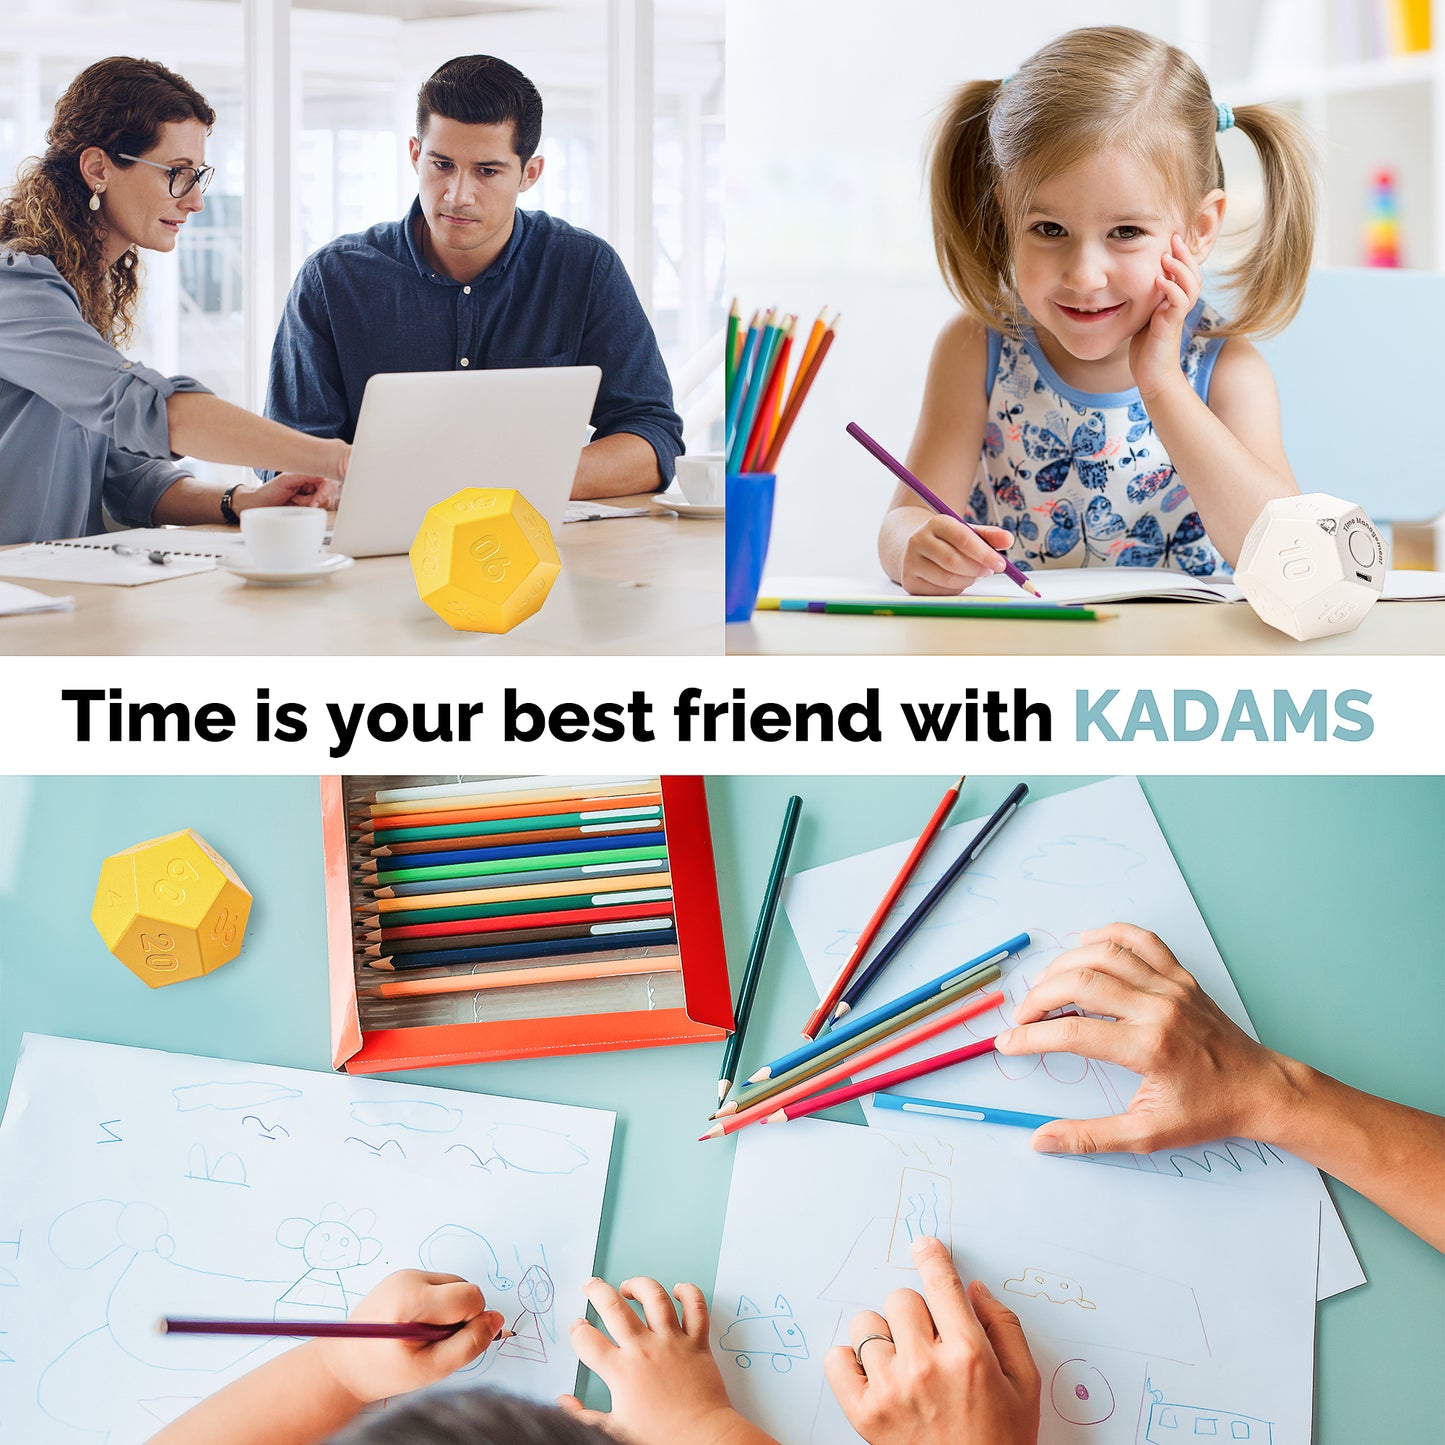 KADAMS Cube Timer Rotating Productivity Timer - Rechargeable Desk Timer Dodecagon with Sound Vibrate Light Alarm Flip Timer for Time Management Kids ADHD 1 3 5 10 15 20 25 30 45 60 90 Minute Countdown